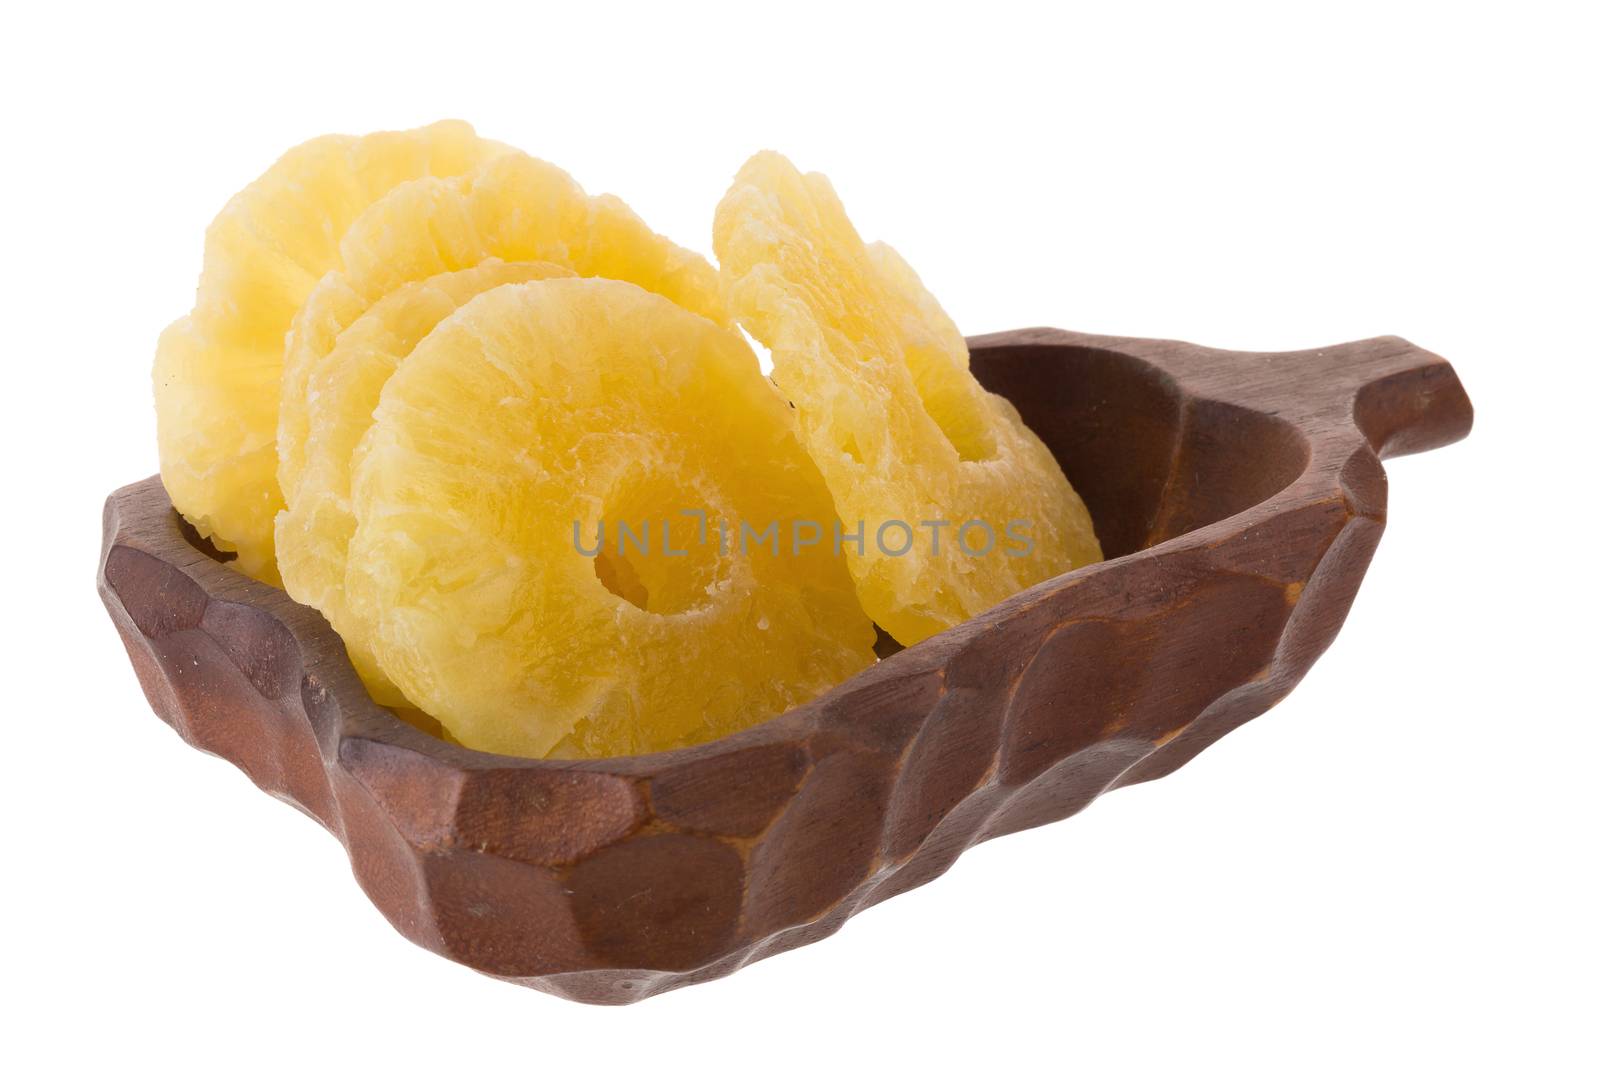 dried ananas slices In the basket, candied pineapple slice isolated on white background.